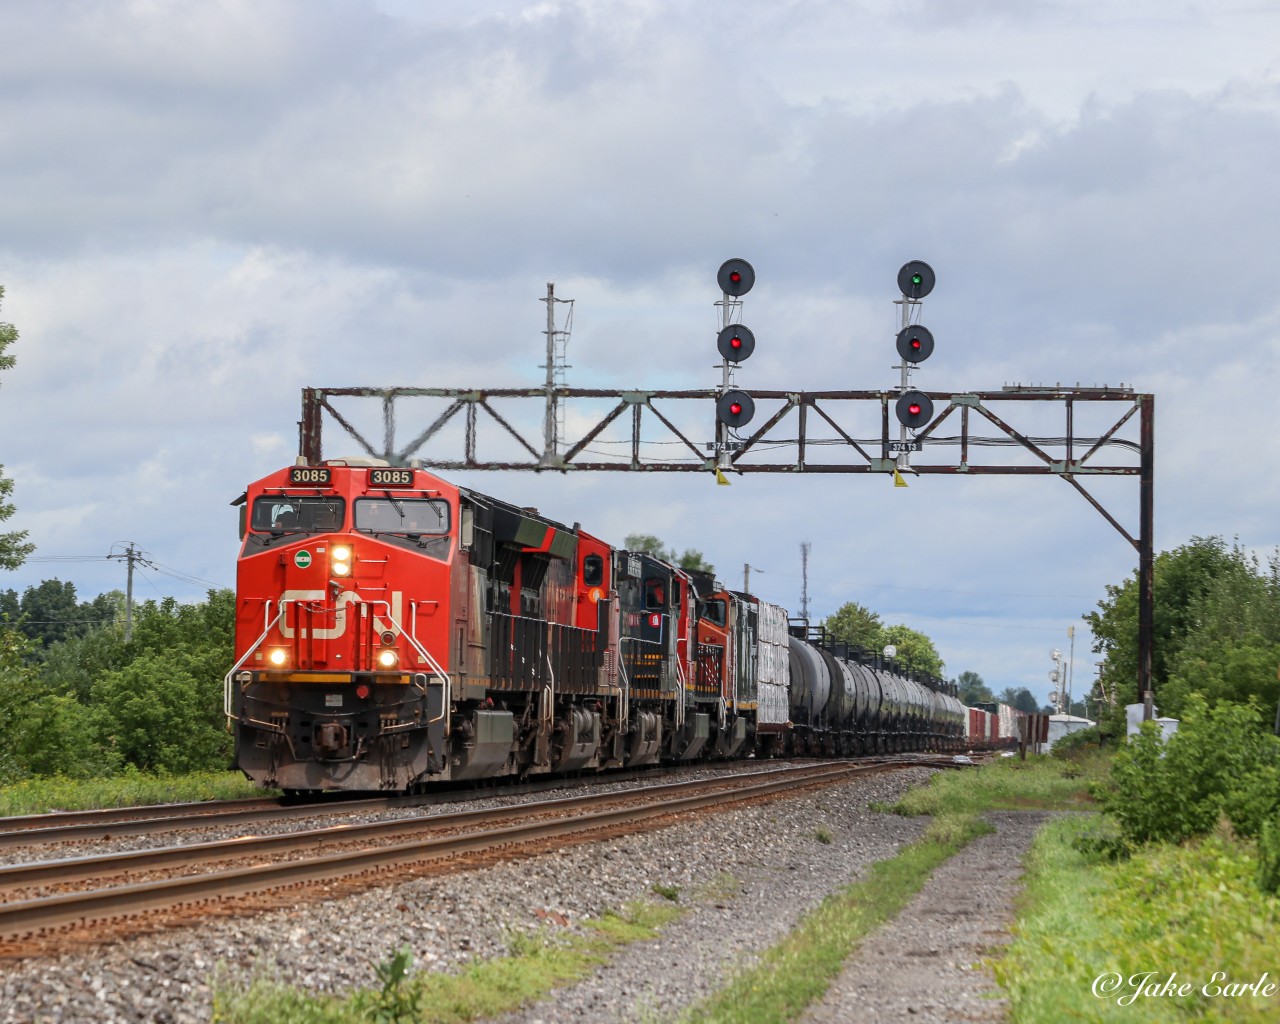 CN 369 ducking underneath an old signal tower by station sign Coteau. The last 3 units likely came out of storage at CN’s Taschereau yard in St Lambert QC, as they were offline and cause those units haven’t been out for some time.